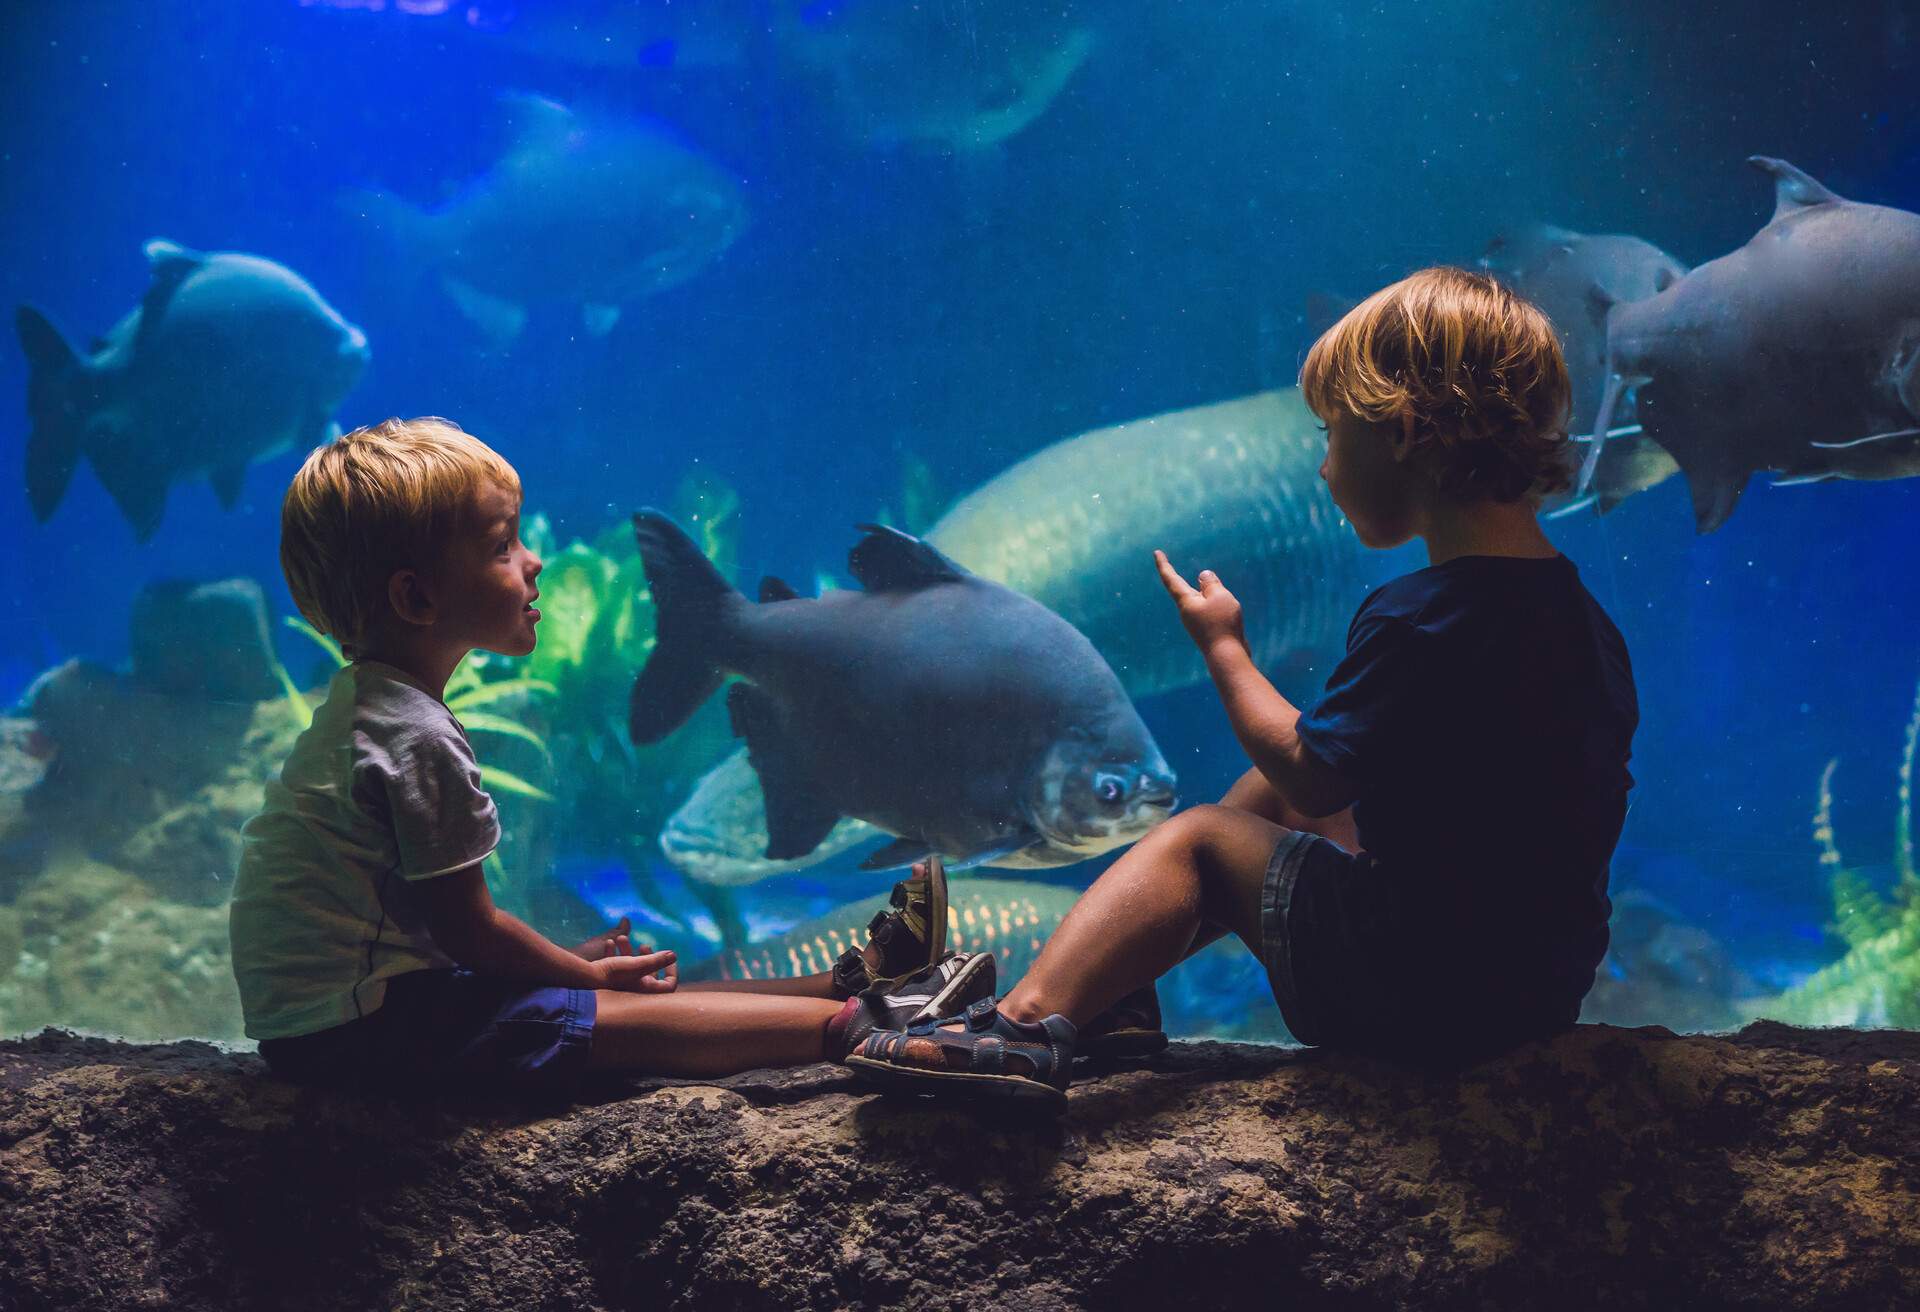 Two young boys sitting on a stone are looking at the fish through the glass aquarium.